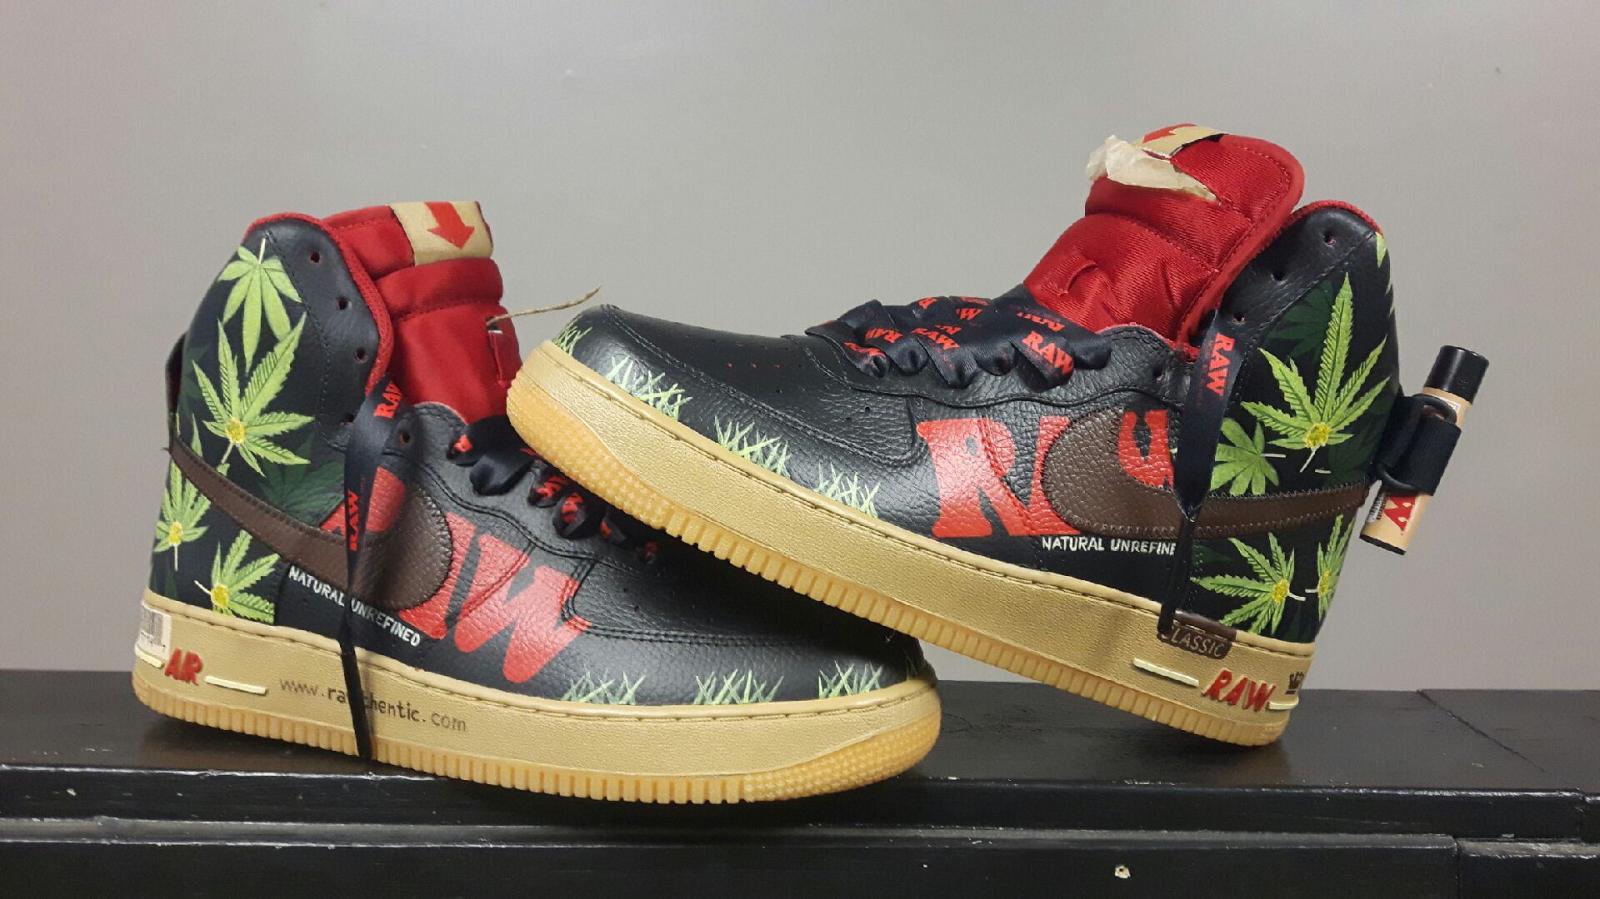 clima Intento Pisoteando triplesick on Twitter: "The long awaited RAW custom Nike Air Force 1's  arrived today https://t.co/aACCh6ZQWr" / Twitter